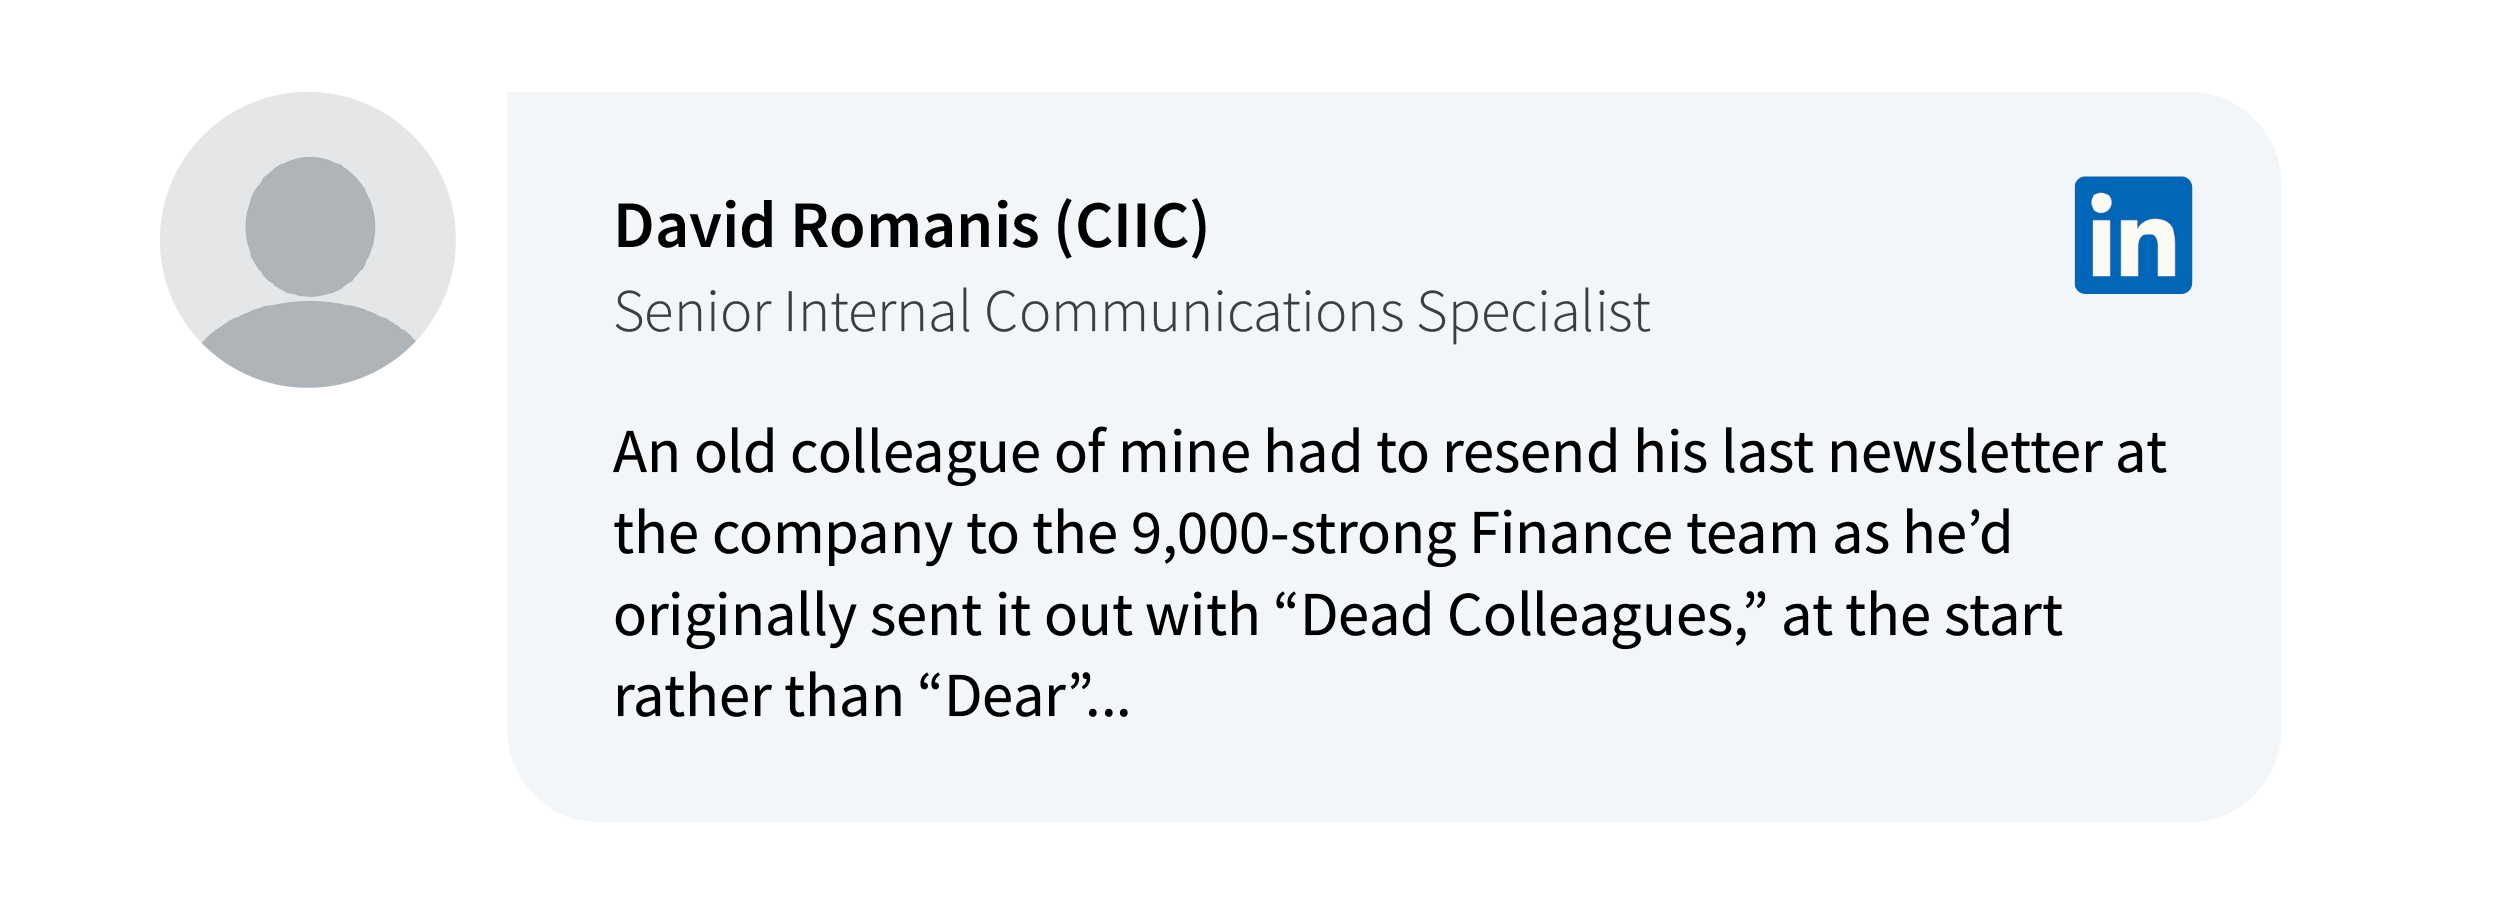 David Romanis on LinkedIn: An old colleague of mine had to resend his last newsletter at the company to the 9,000-strong Finance team as he’d originally sent it out with “Dead Colleagues,” at the start rather than “Dear”...